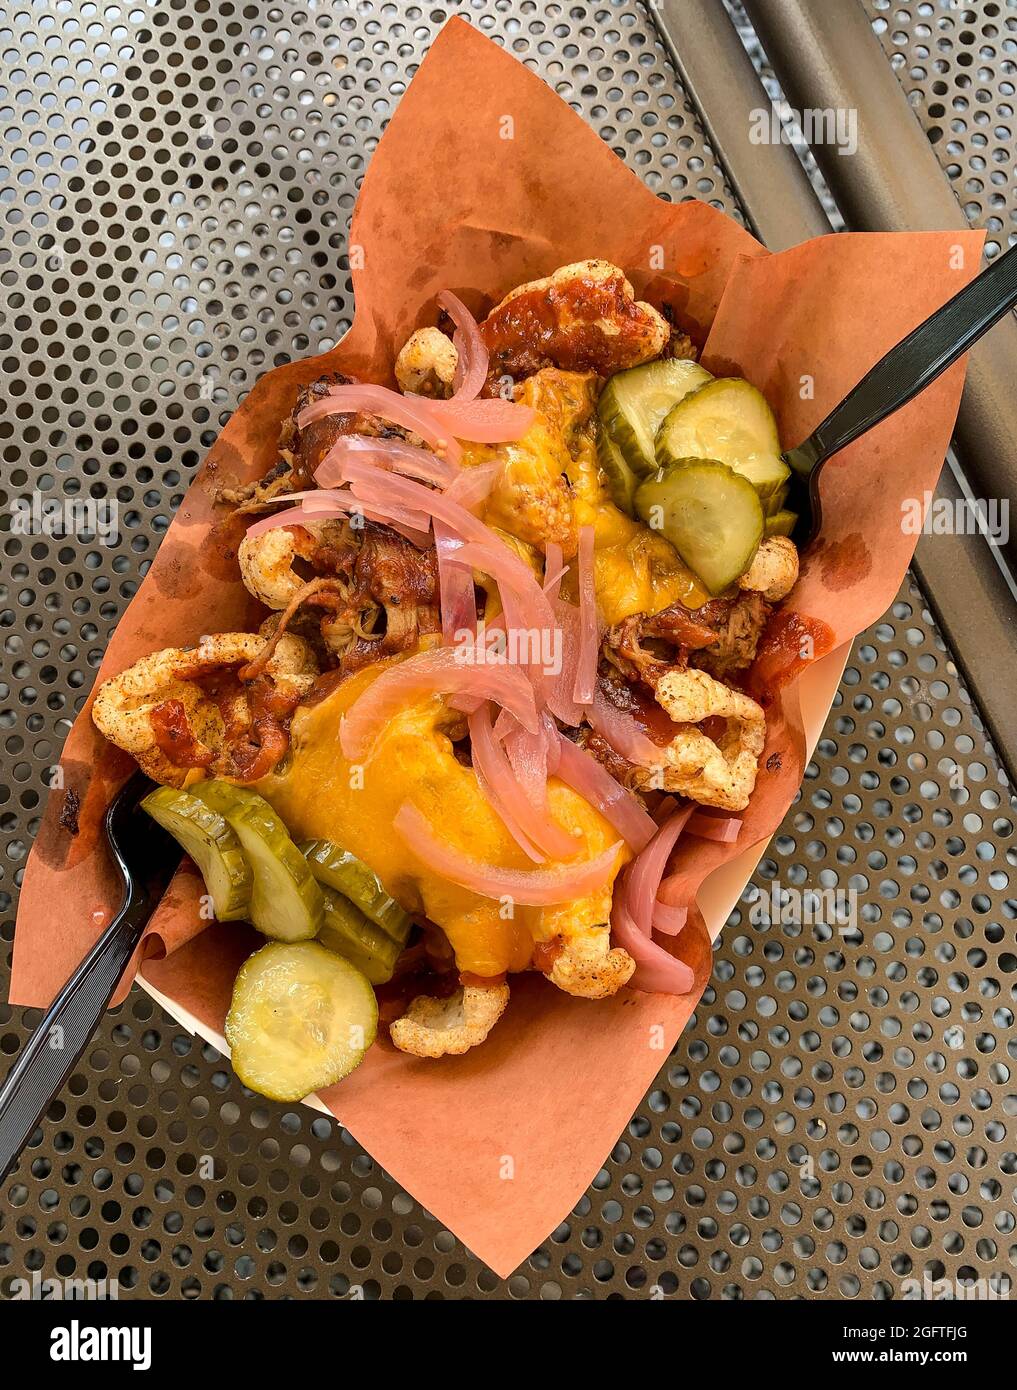 White Sulphur Springs, West Virginia.  Road Hog's Barbeque Pork Rind Nachos, Pulled Pork, Onions, Pickles, Sauce, and Cheddar. Stock Photo